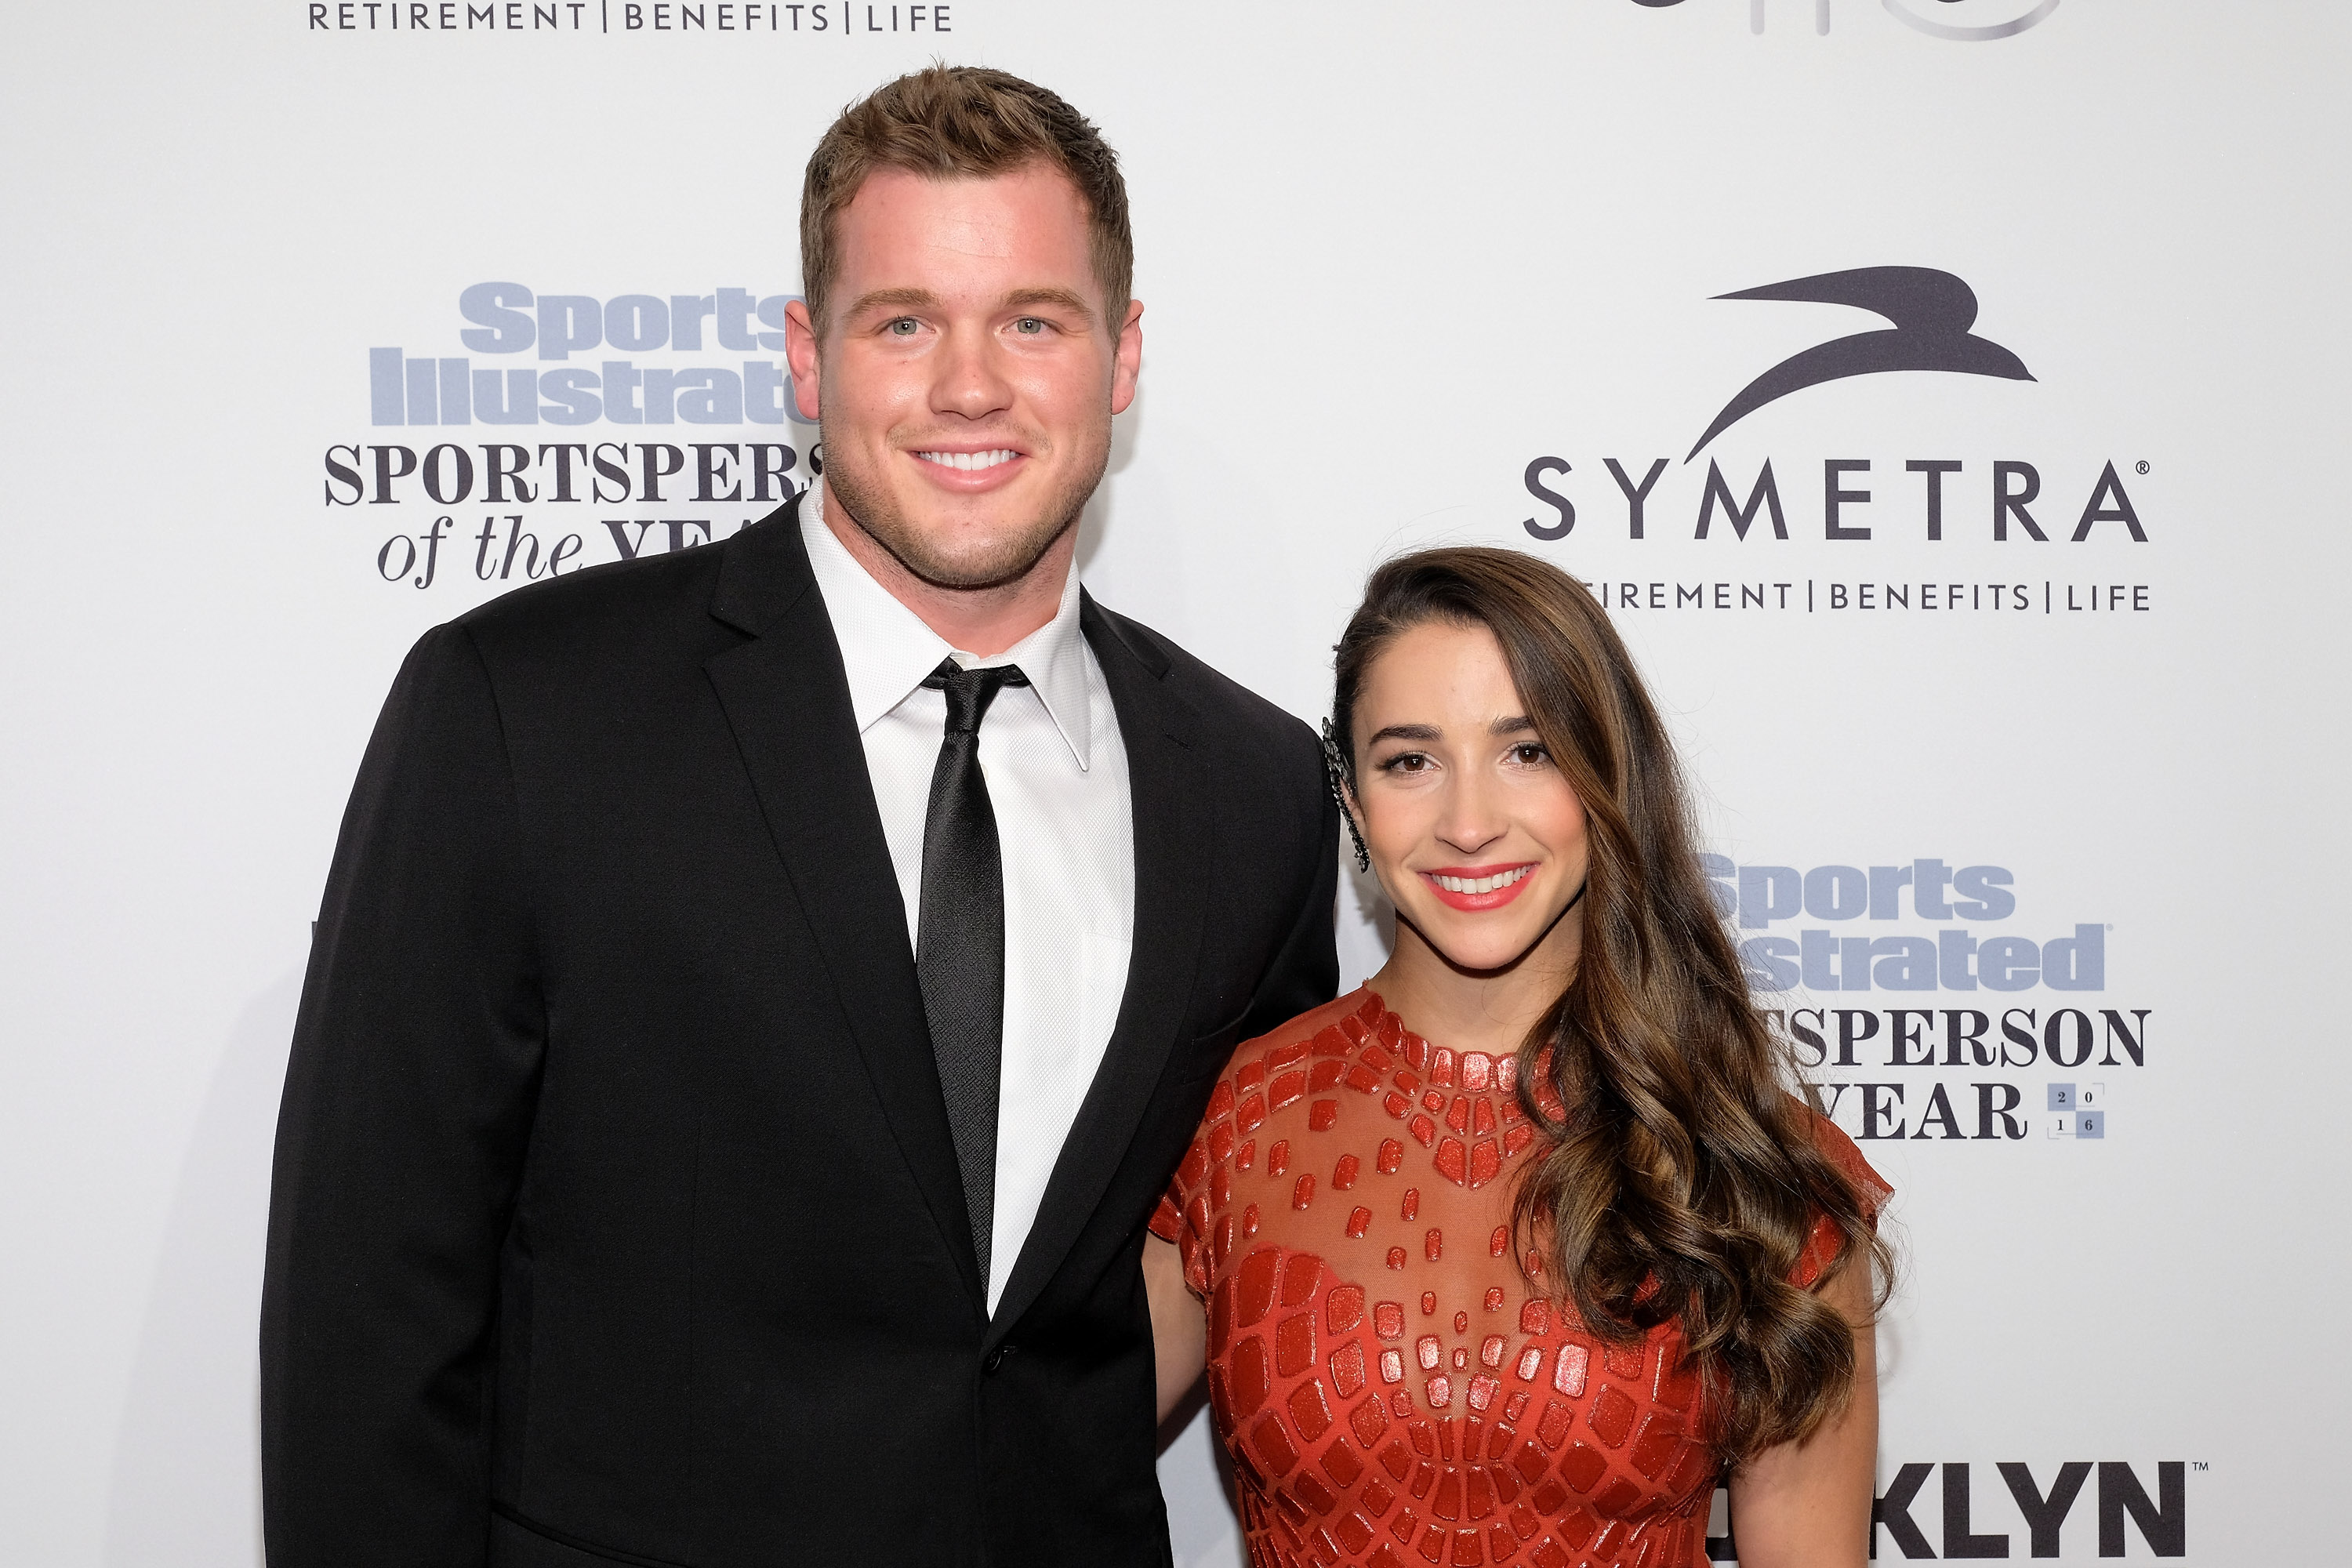 Colton Underwood and Aly Raisman attend the 2016 Sports Illustrated Sportsperson of the Year at Barclays Center on December 12, 2016, in the Brooklyn, New York City. | Source: Getty Images